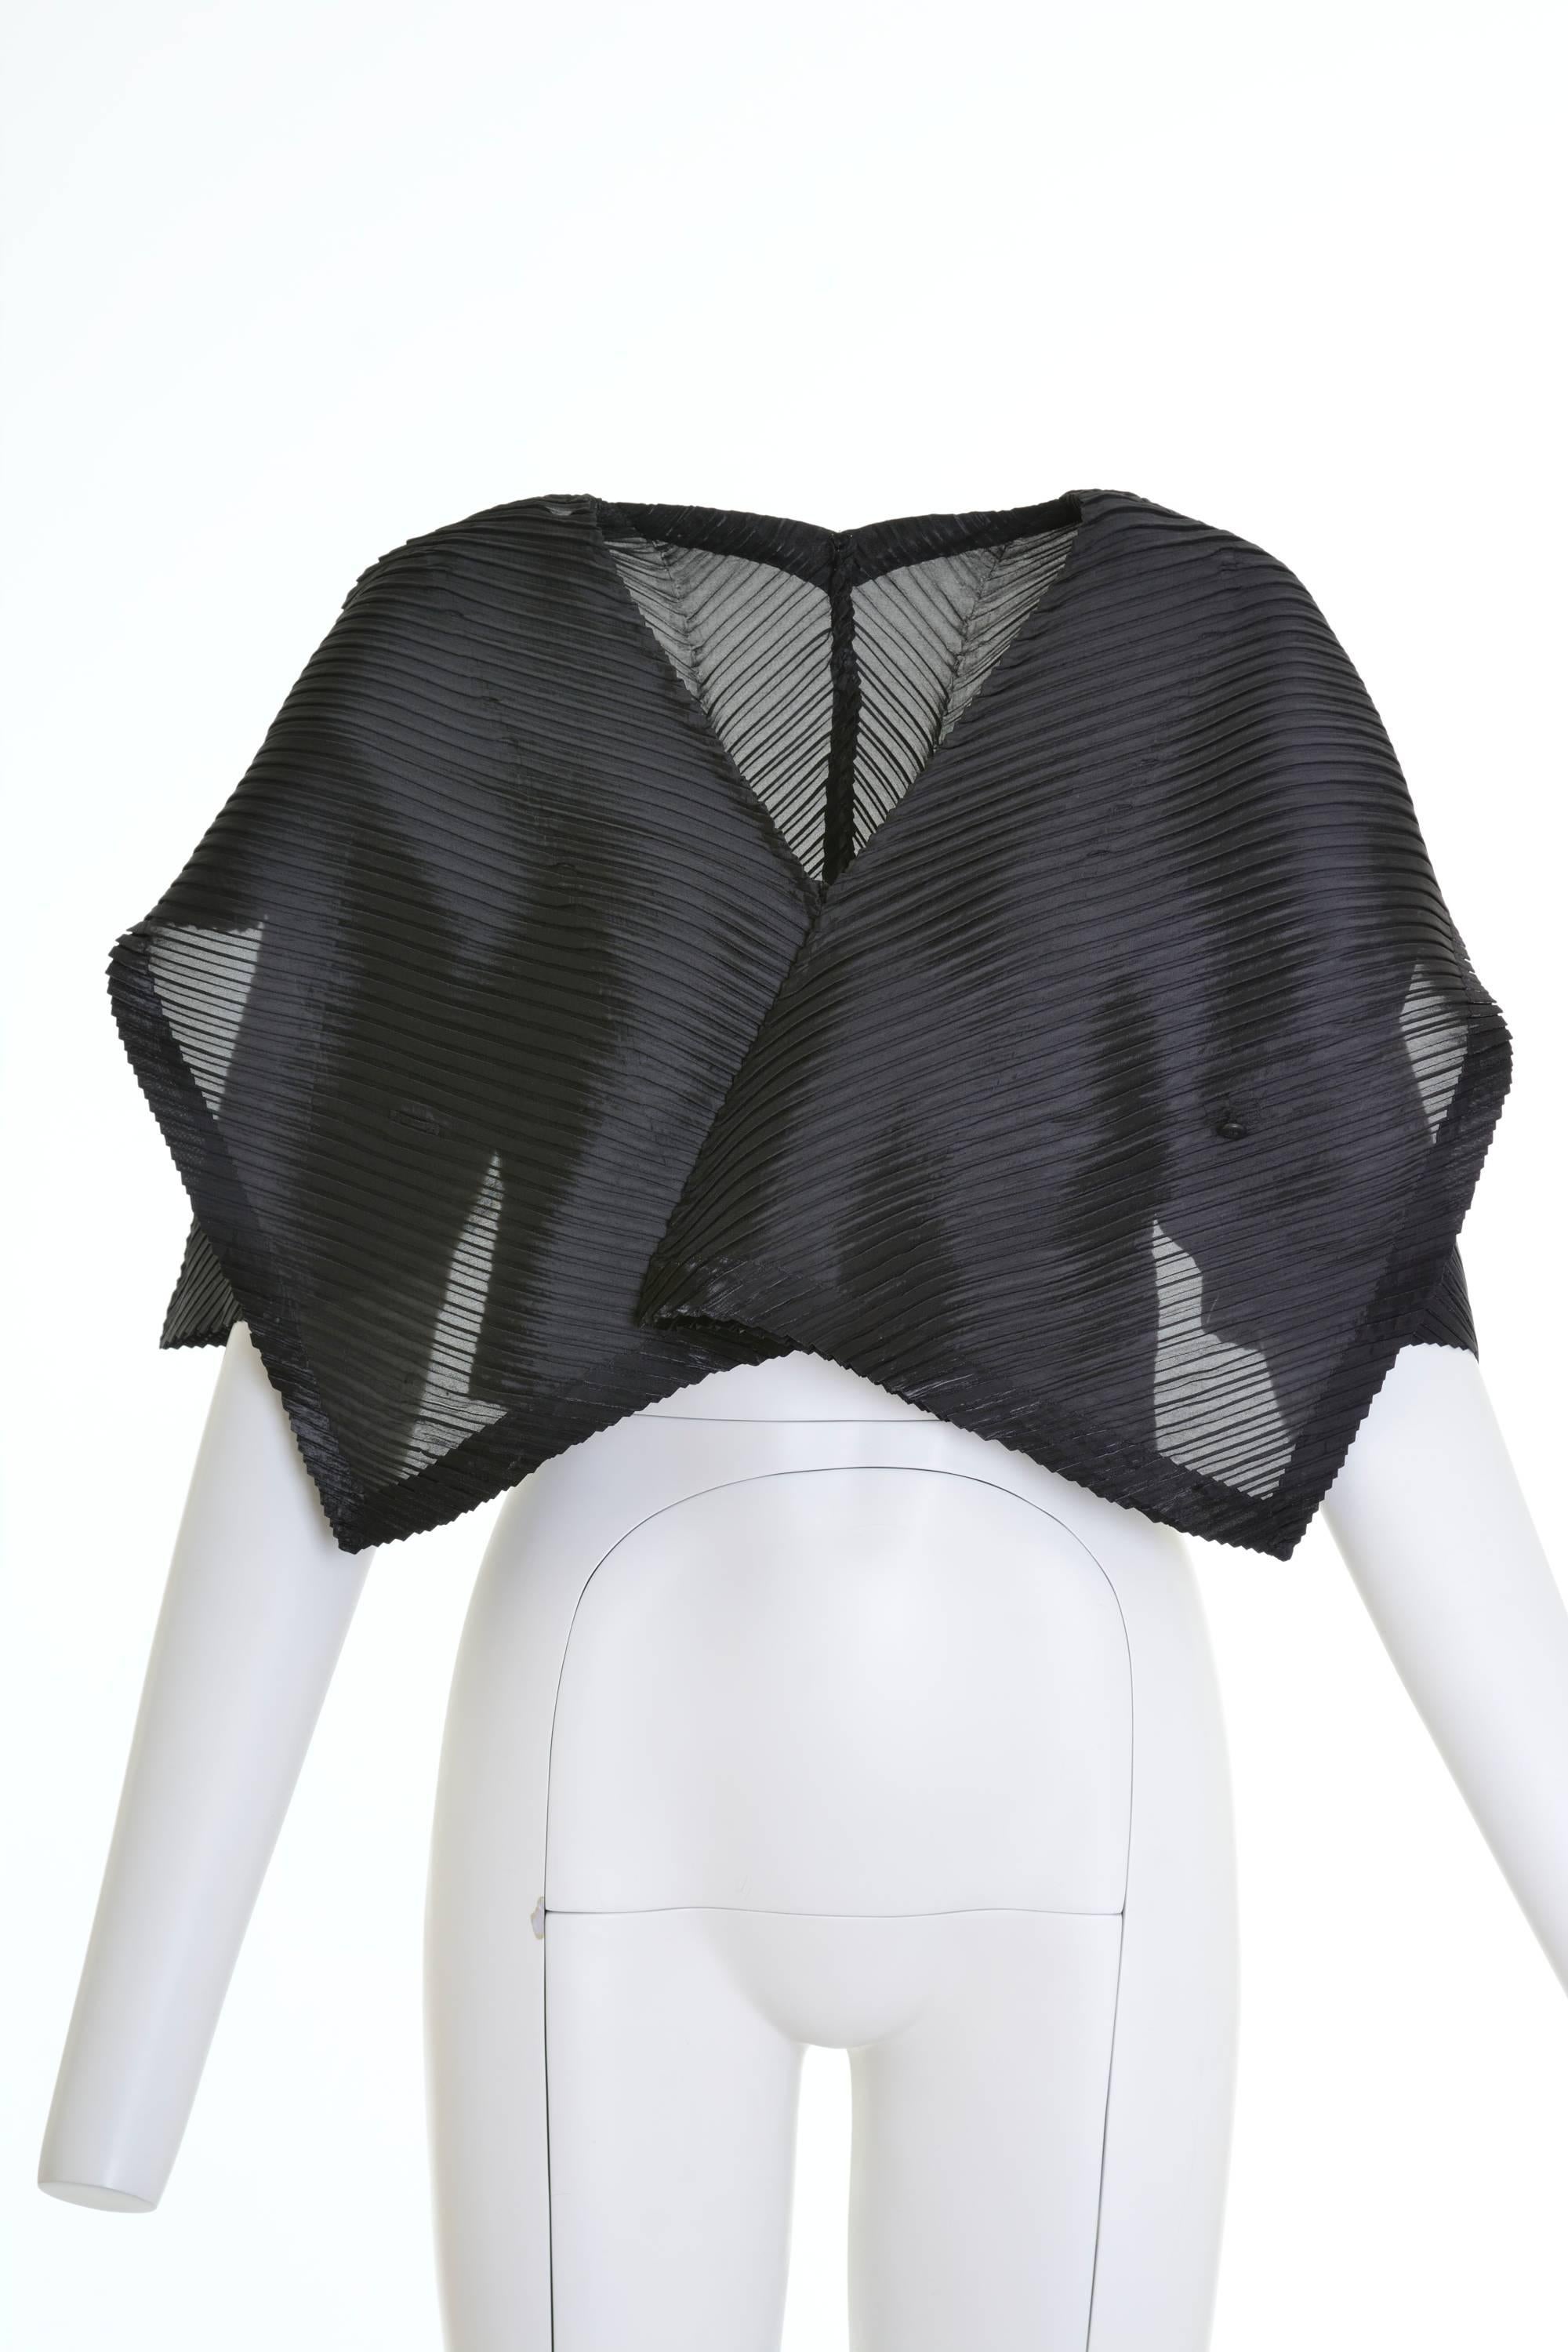 ISSEY MIYAKE Black Pleateds Shirt Top In Excellent Condition For Sale In Milan, Italy